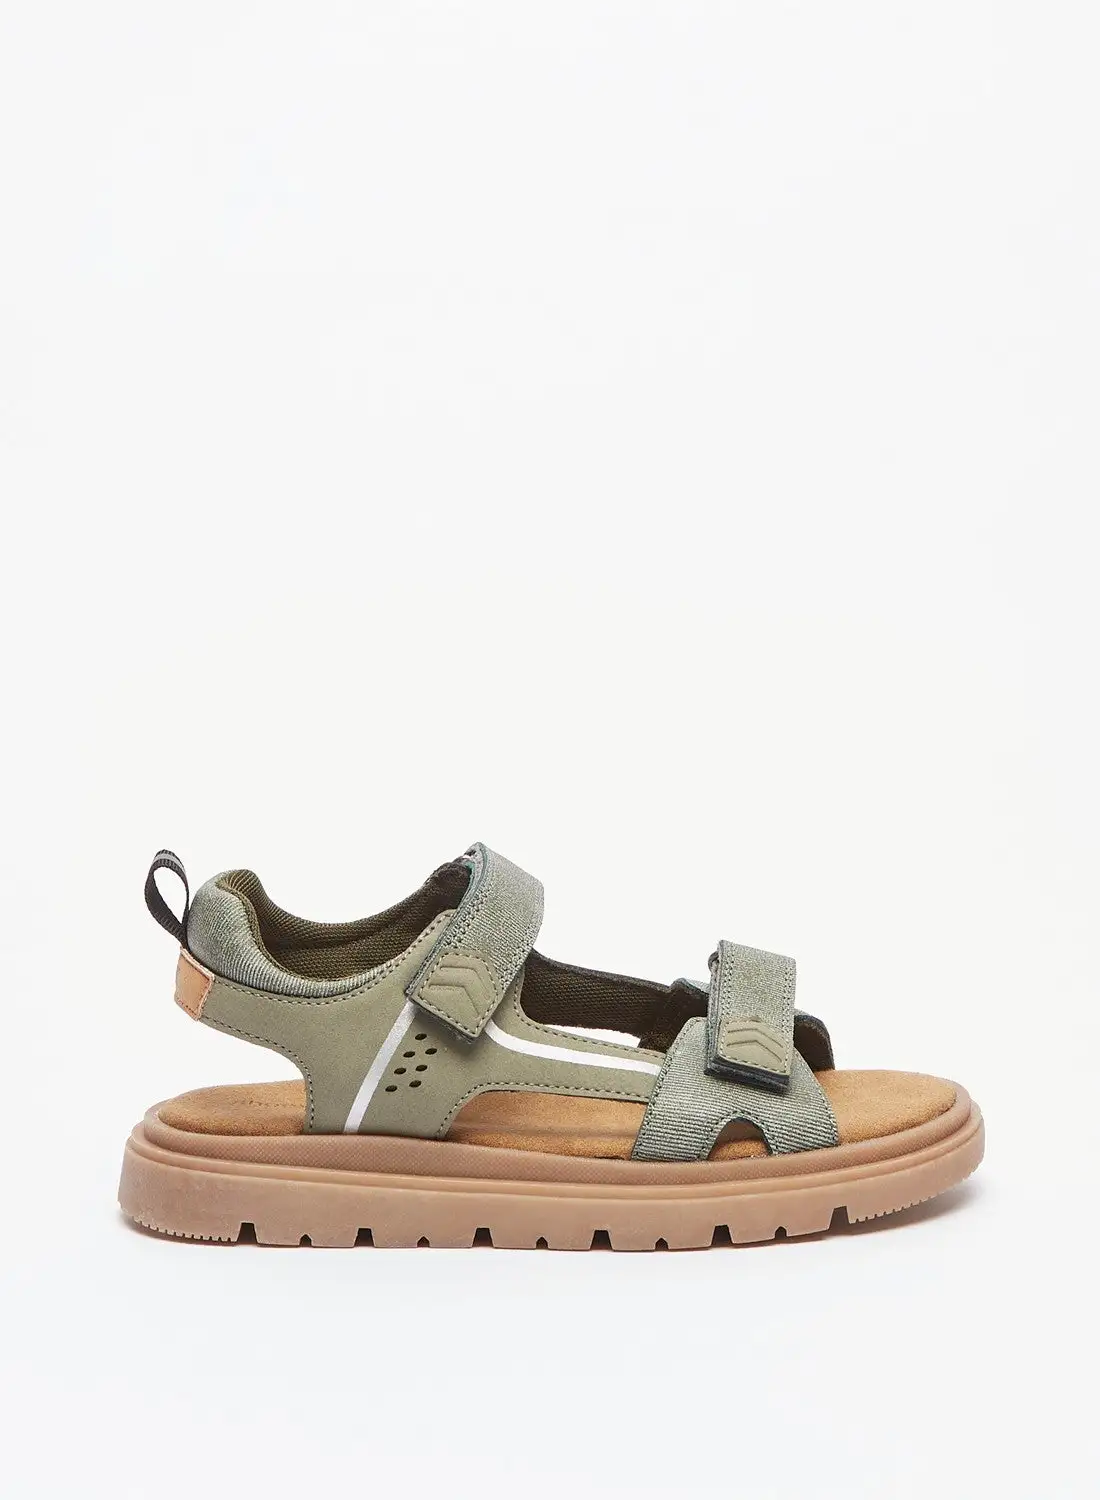 shoexpress Boys Solid Sandals with Hook and Loop Closure Ramadan Collection